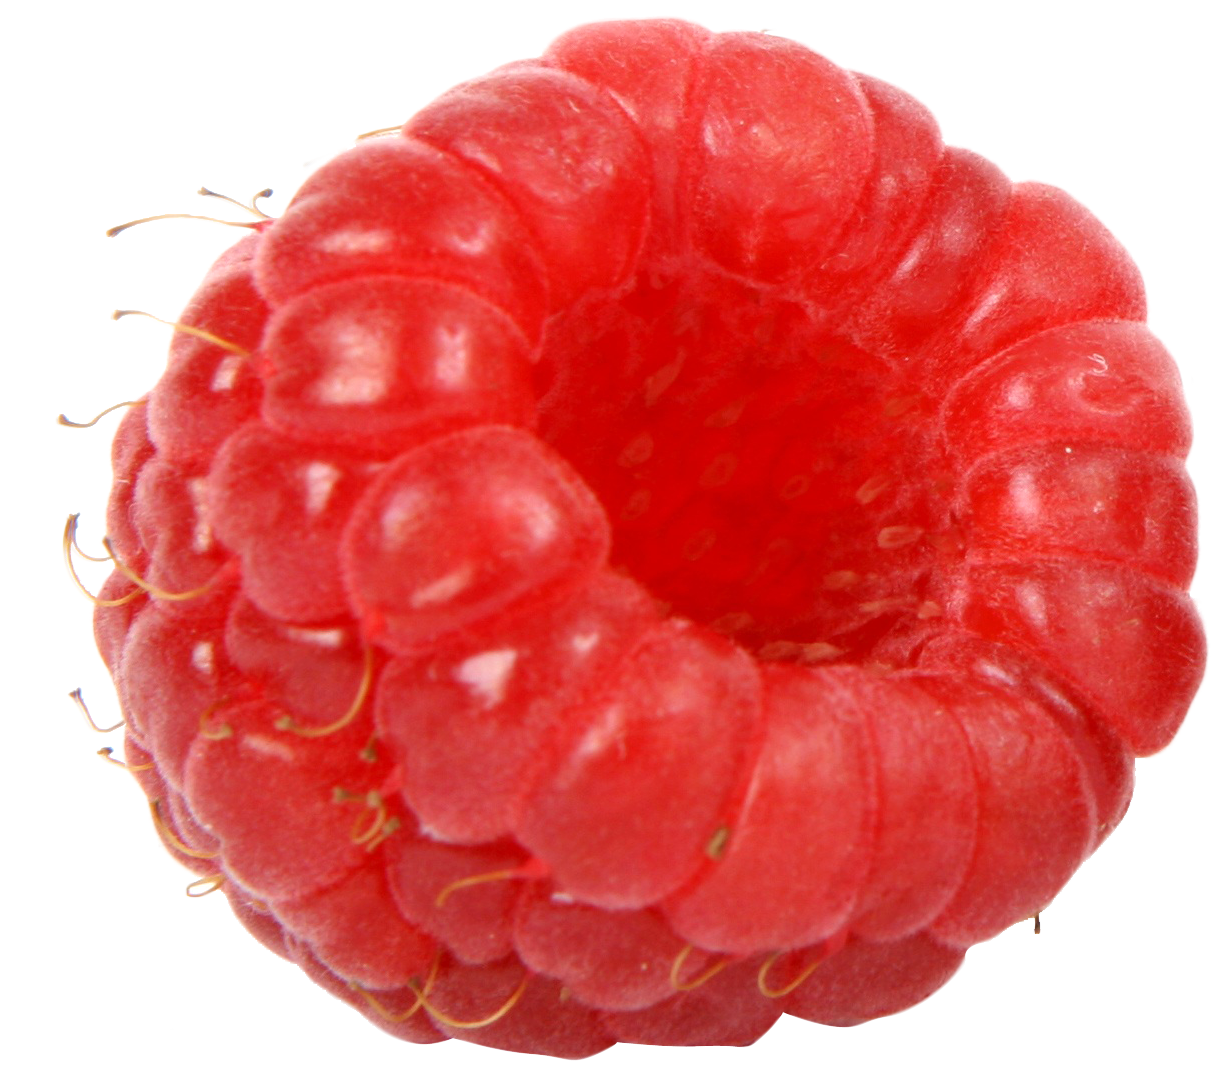 Raspberry PNG Clipart